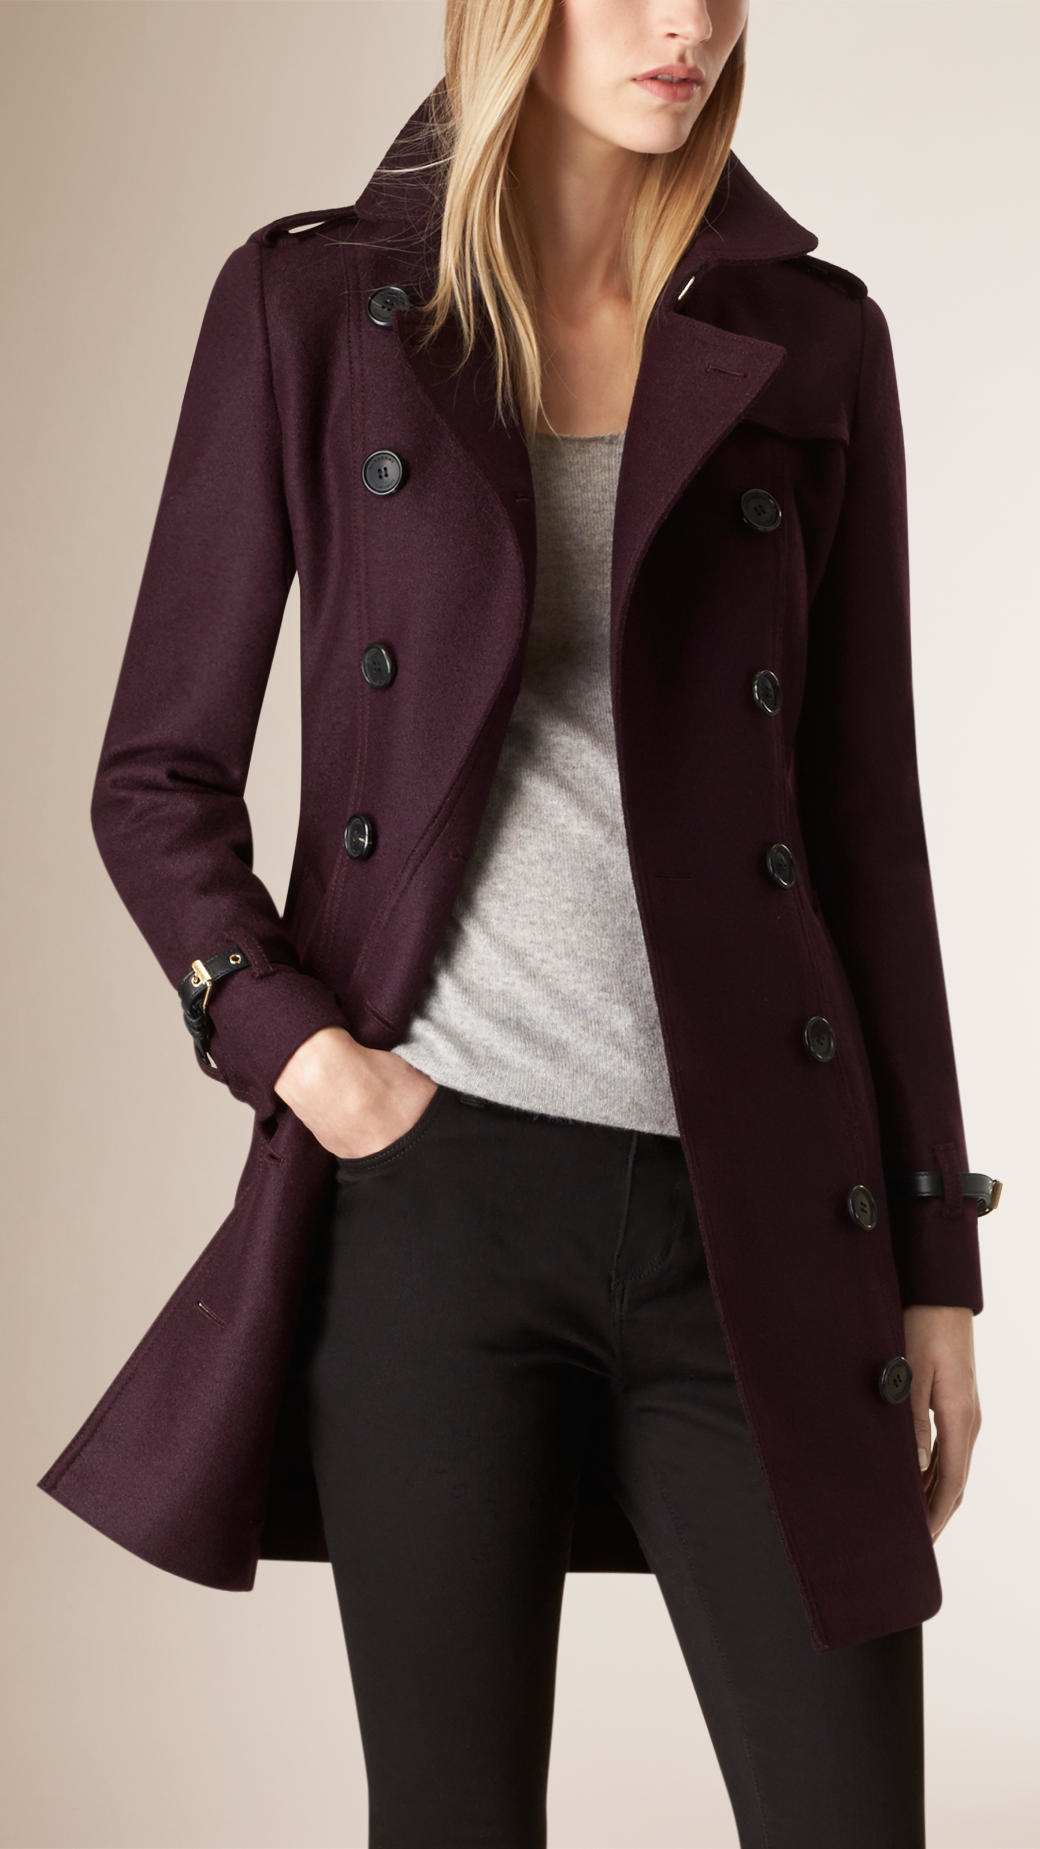 Lyst - Burberry Leather Trim Virgin Wool Trench Coat in Purple